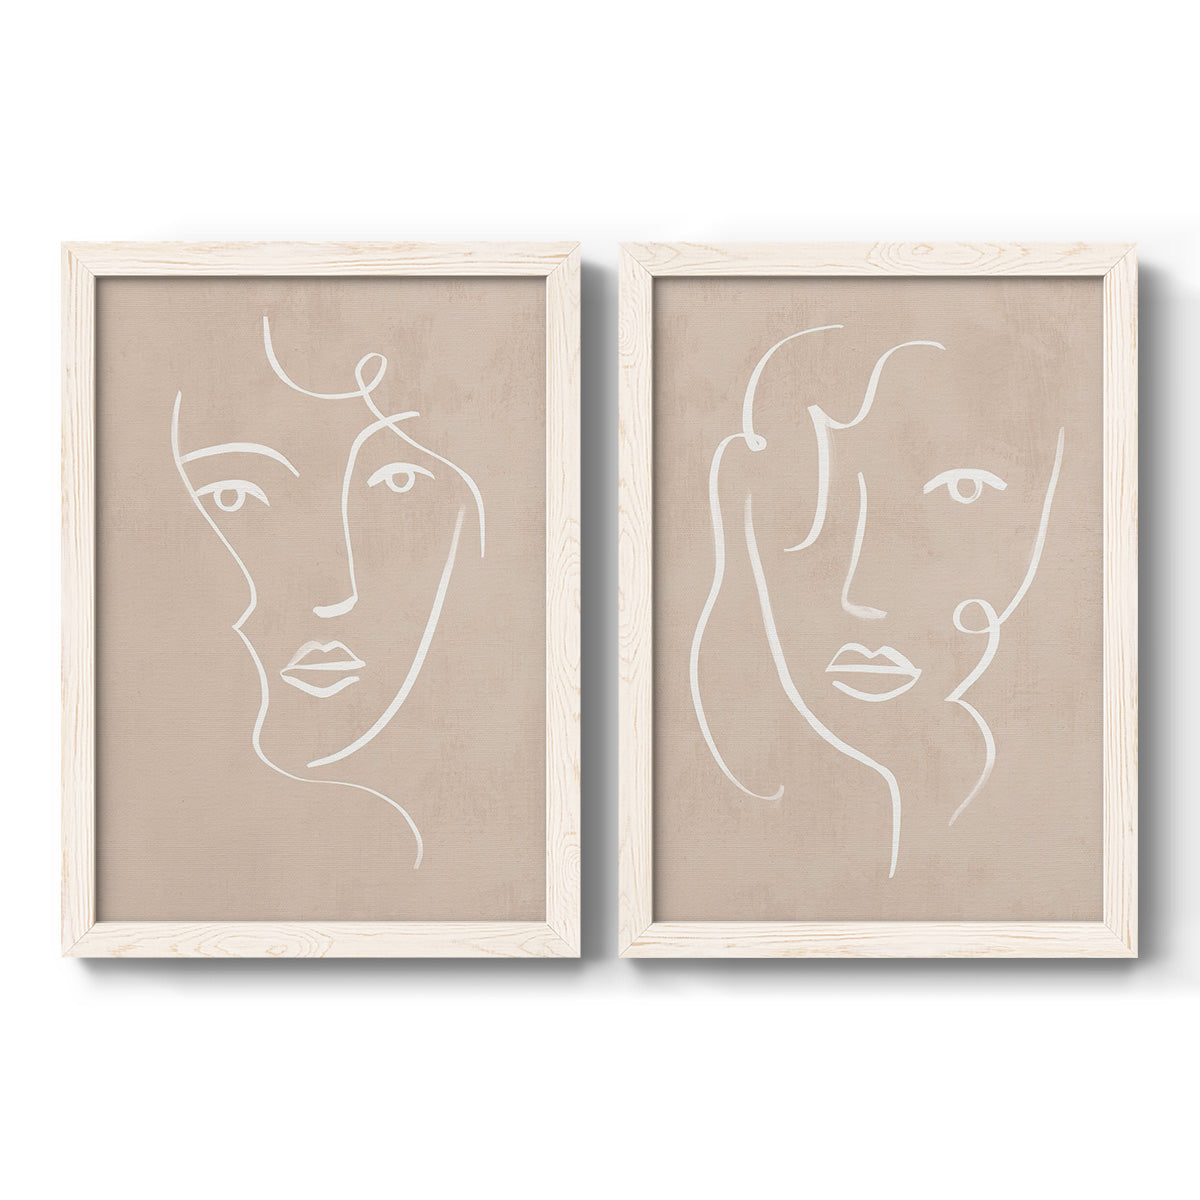 Curly Face I - Premium Framed Canvas 2 Piece Set - Ready to Hang